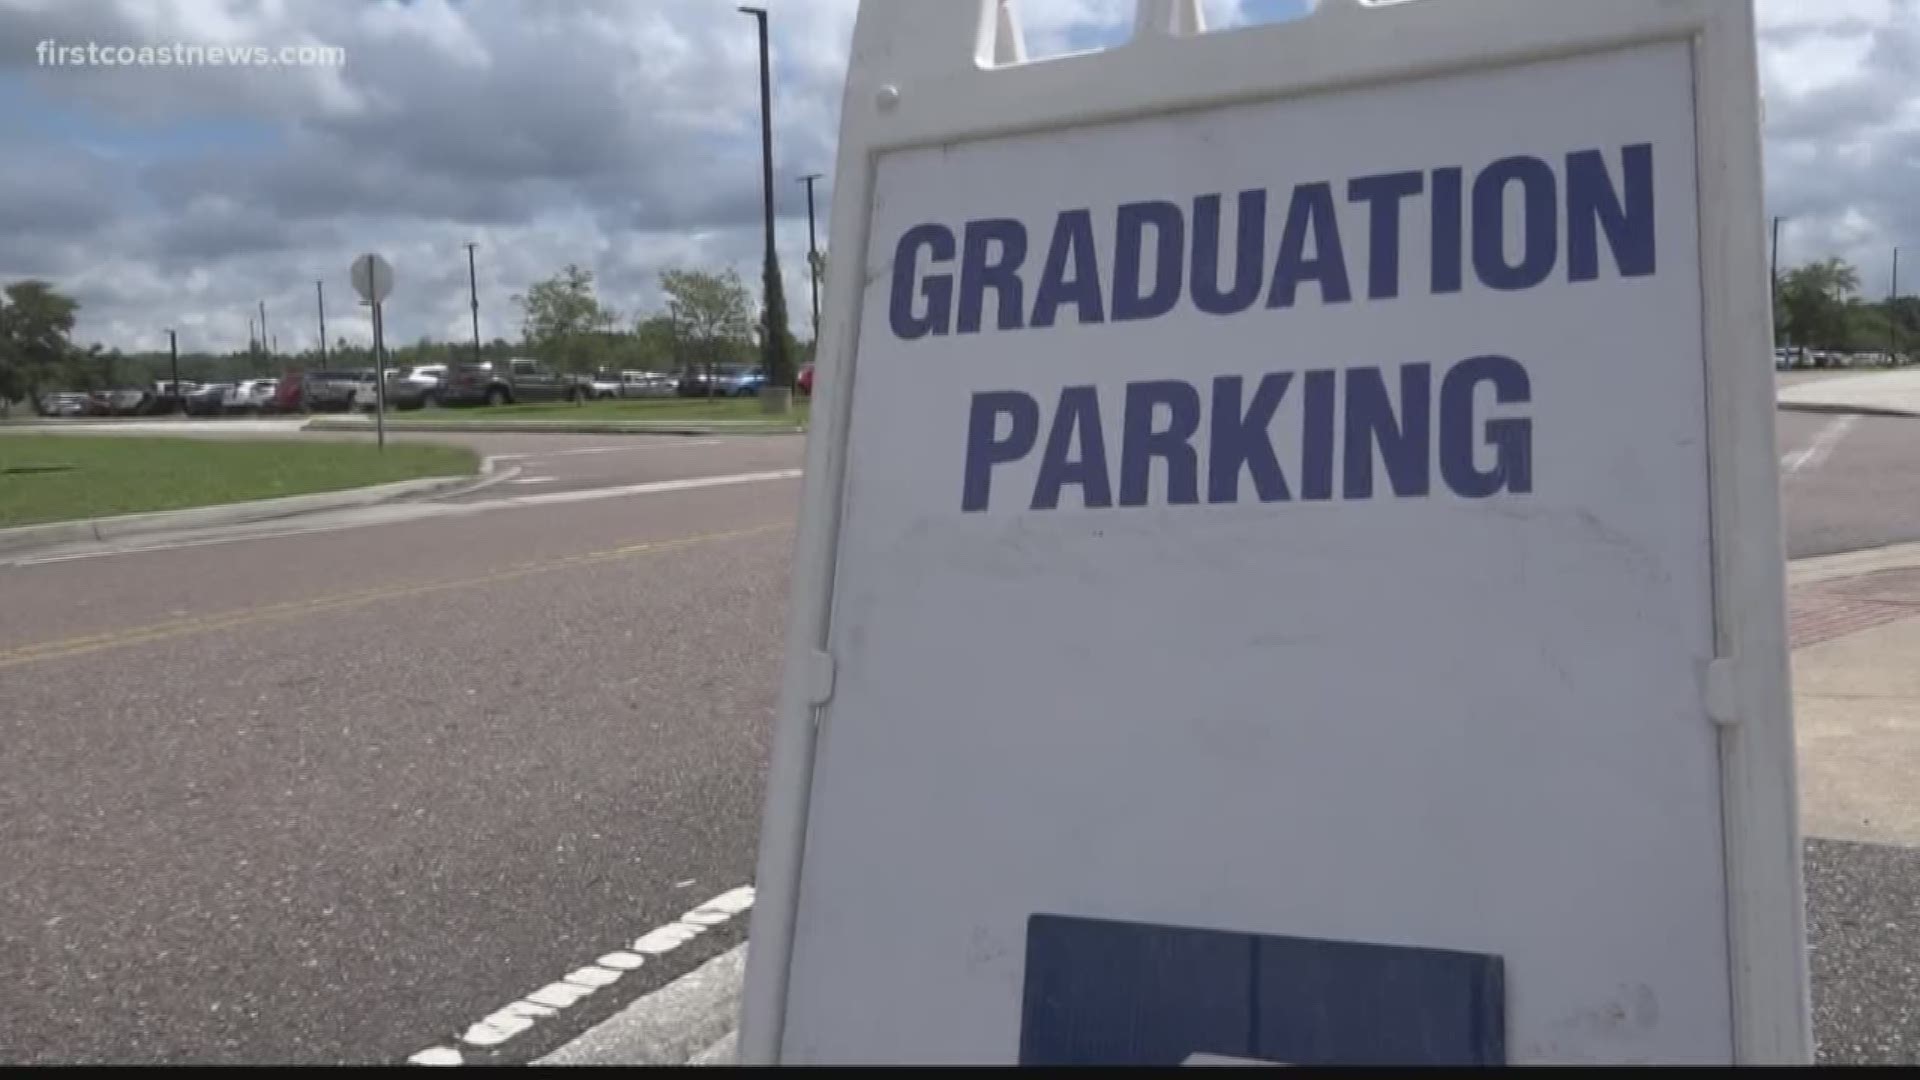 The University of North Florida increased security at graduation ceremonies, likely in response to the deadly school shooting that occurred in Texas.